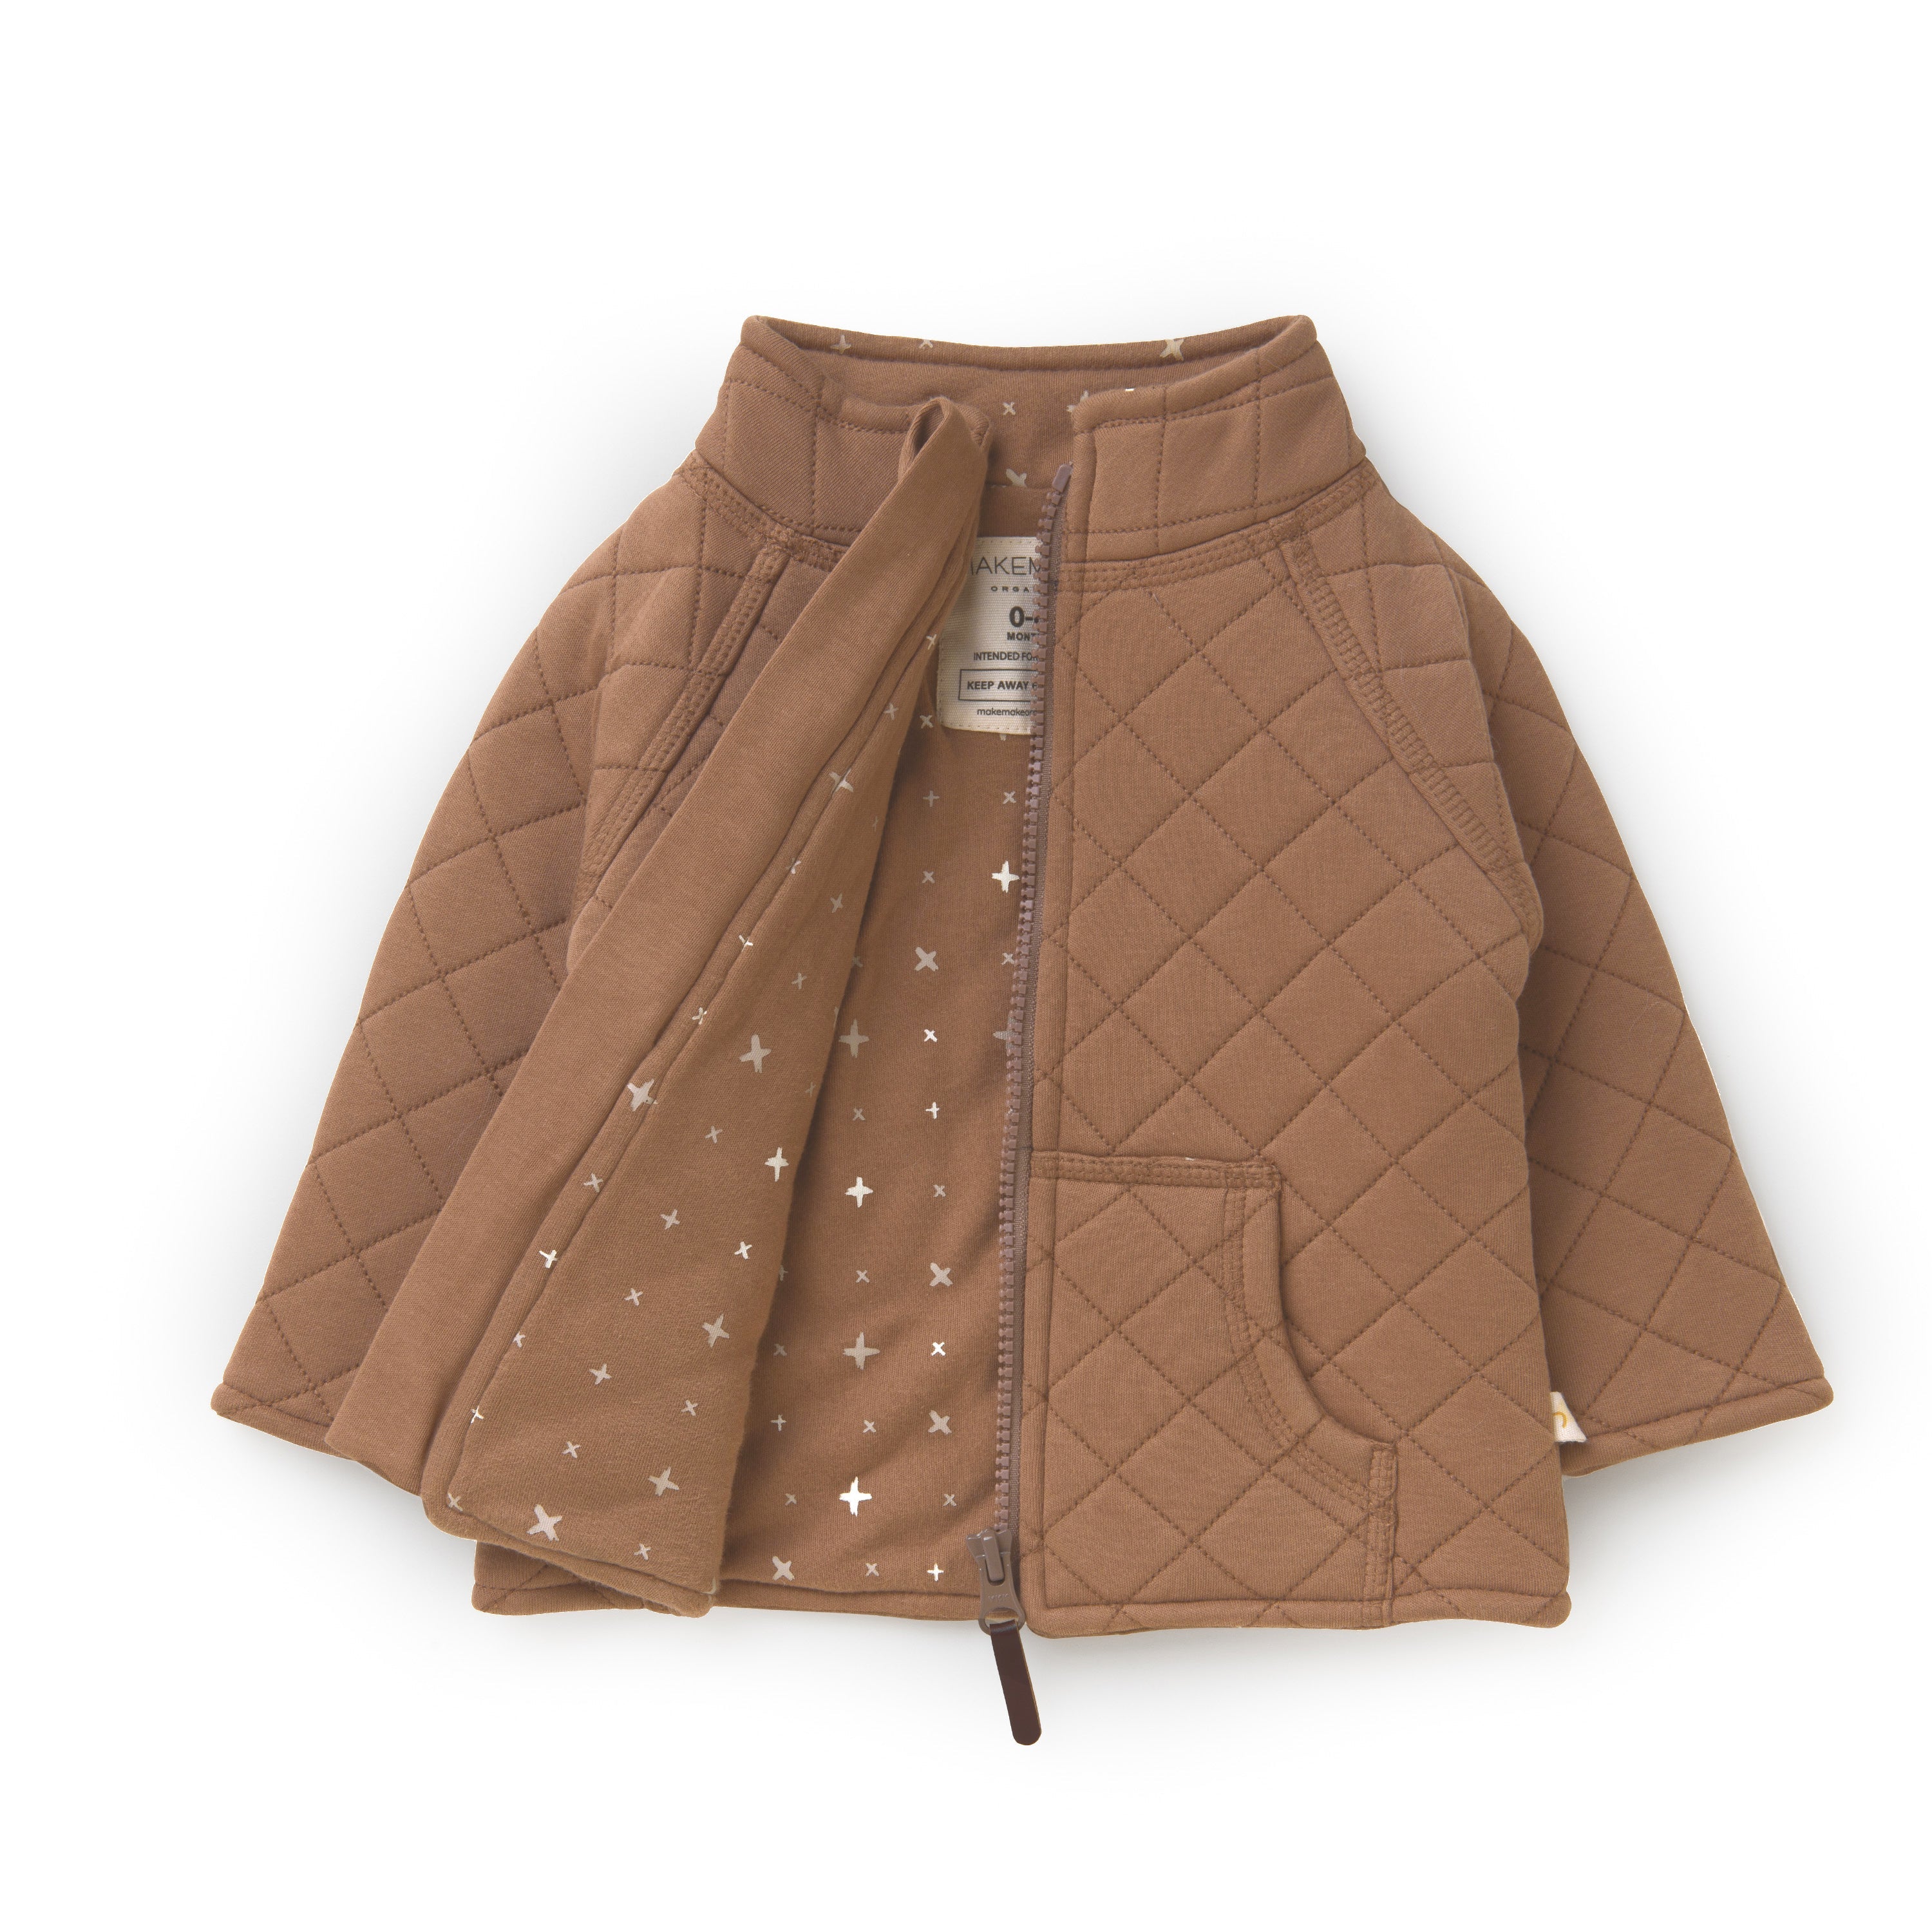 A brown quilted jacket from Organic Kids with a zipper, partially open to reveal a lining with a white star pattern. The jacket is displayed flat against a white background.